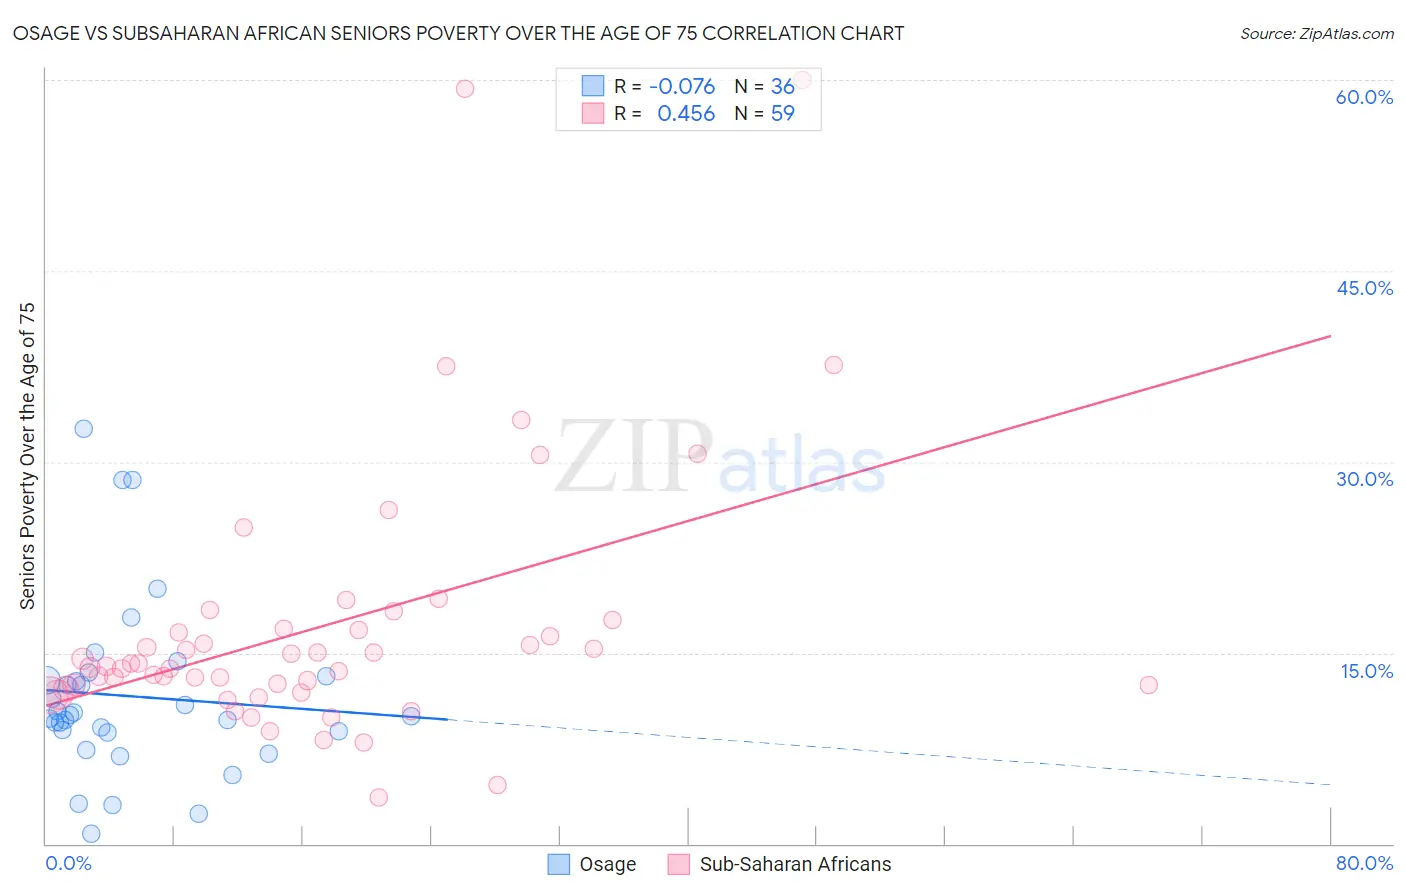 Osage vs Subsaharan African Seniors Poverty Over the Age of 75